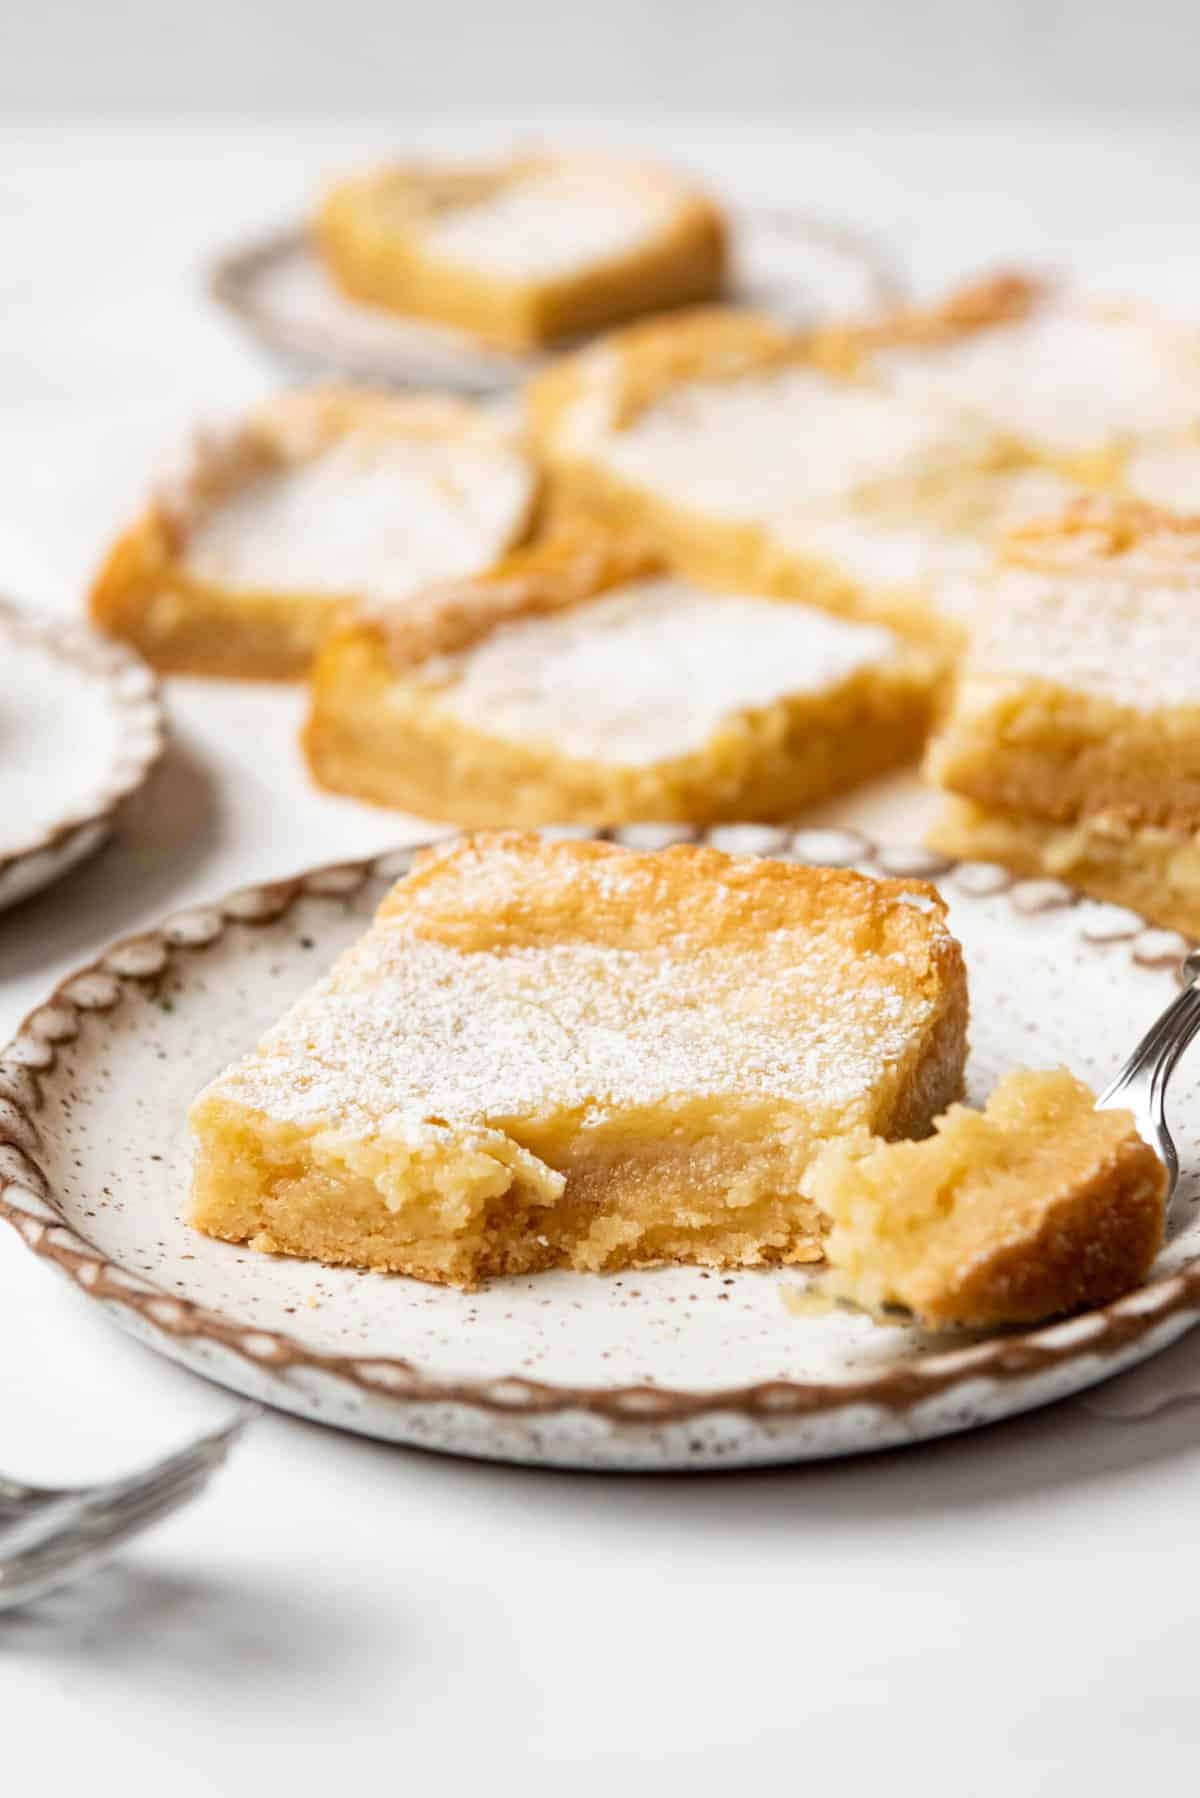 A slice of St. Louis gooey butter cake on a plate with a bite taken out of it.